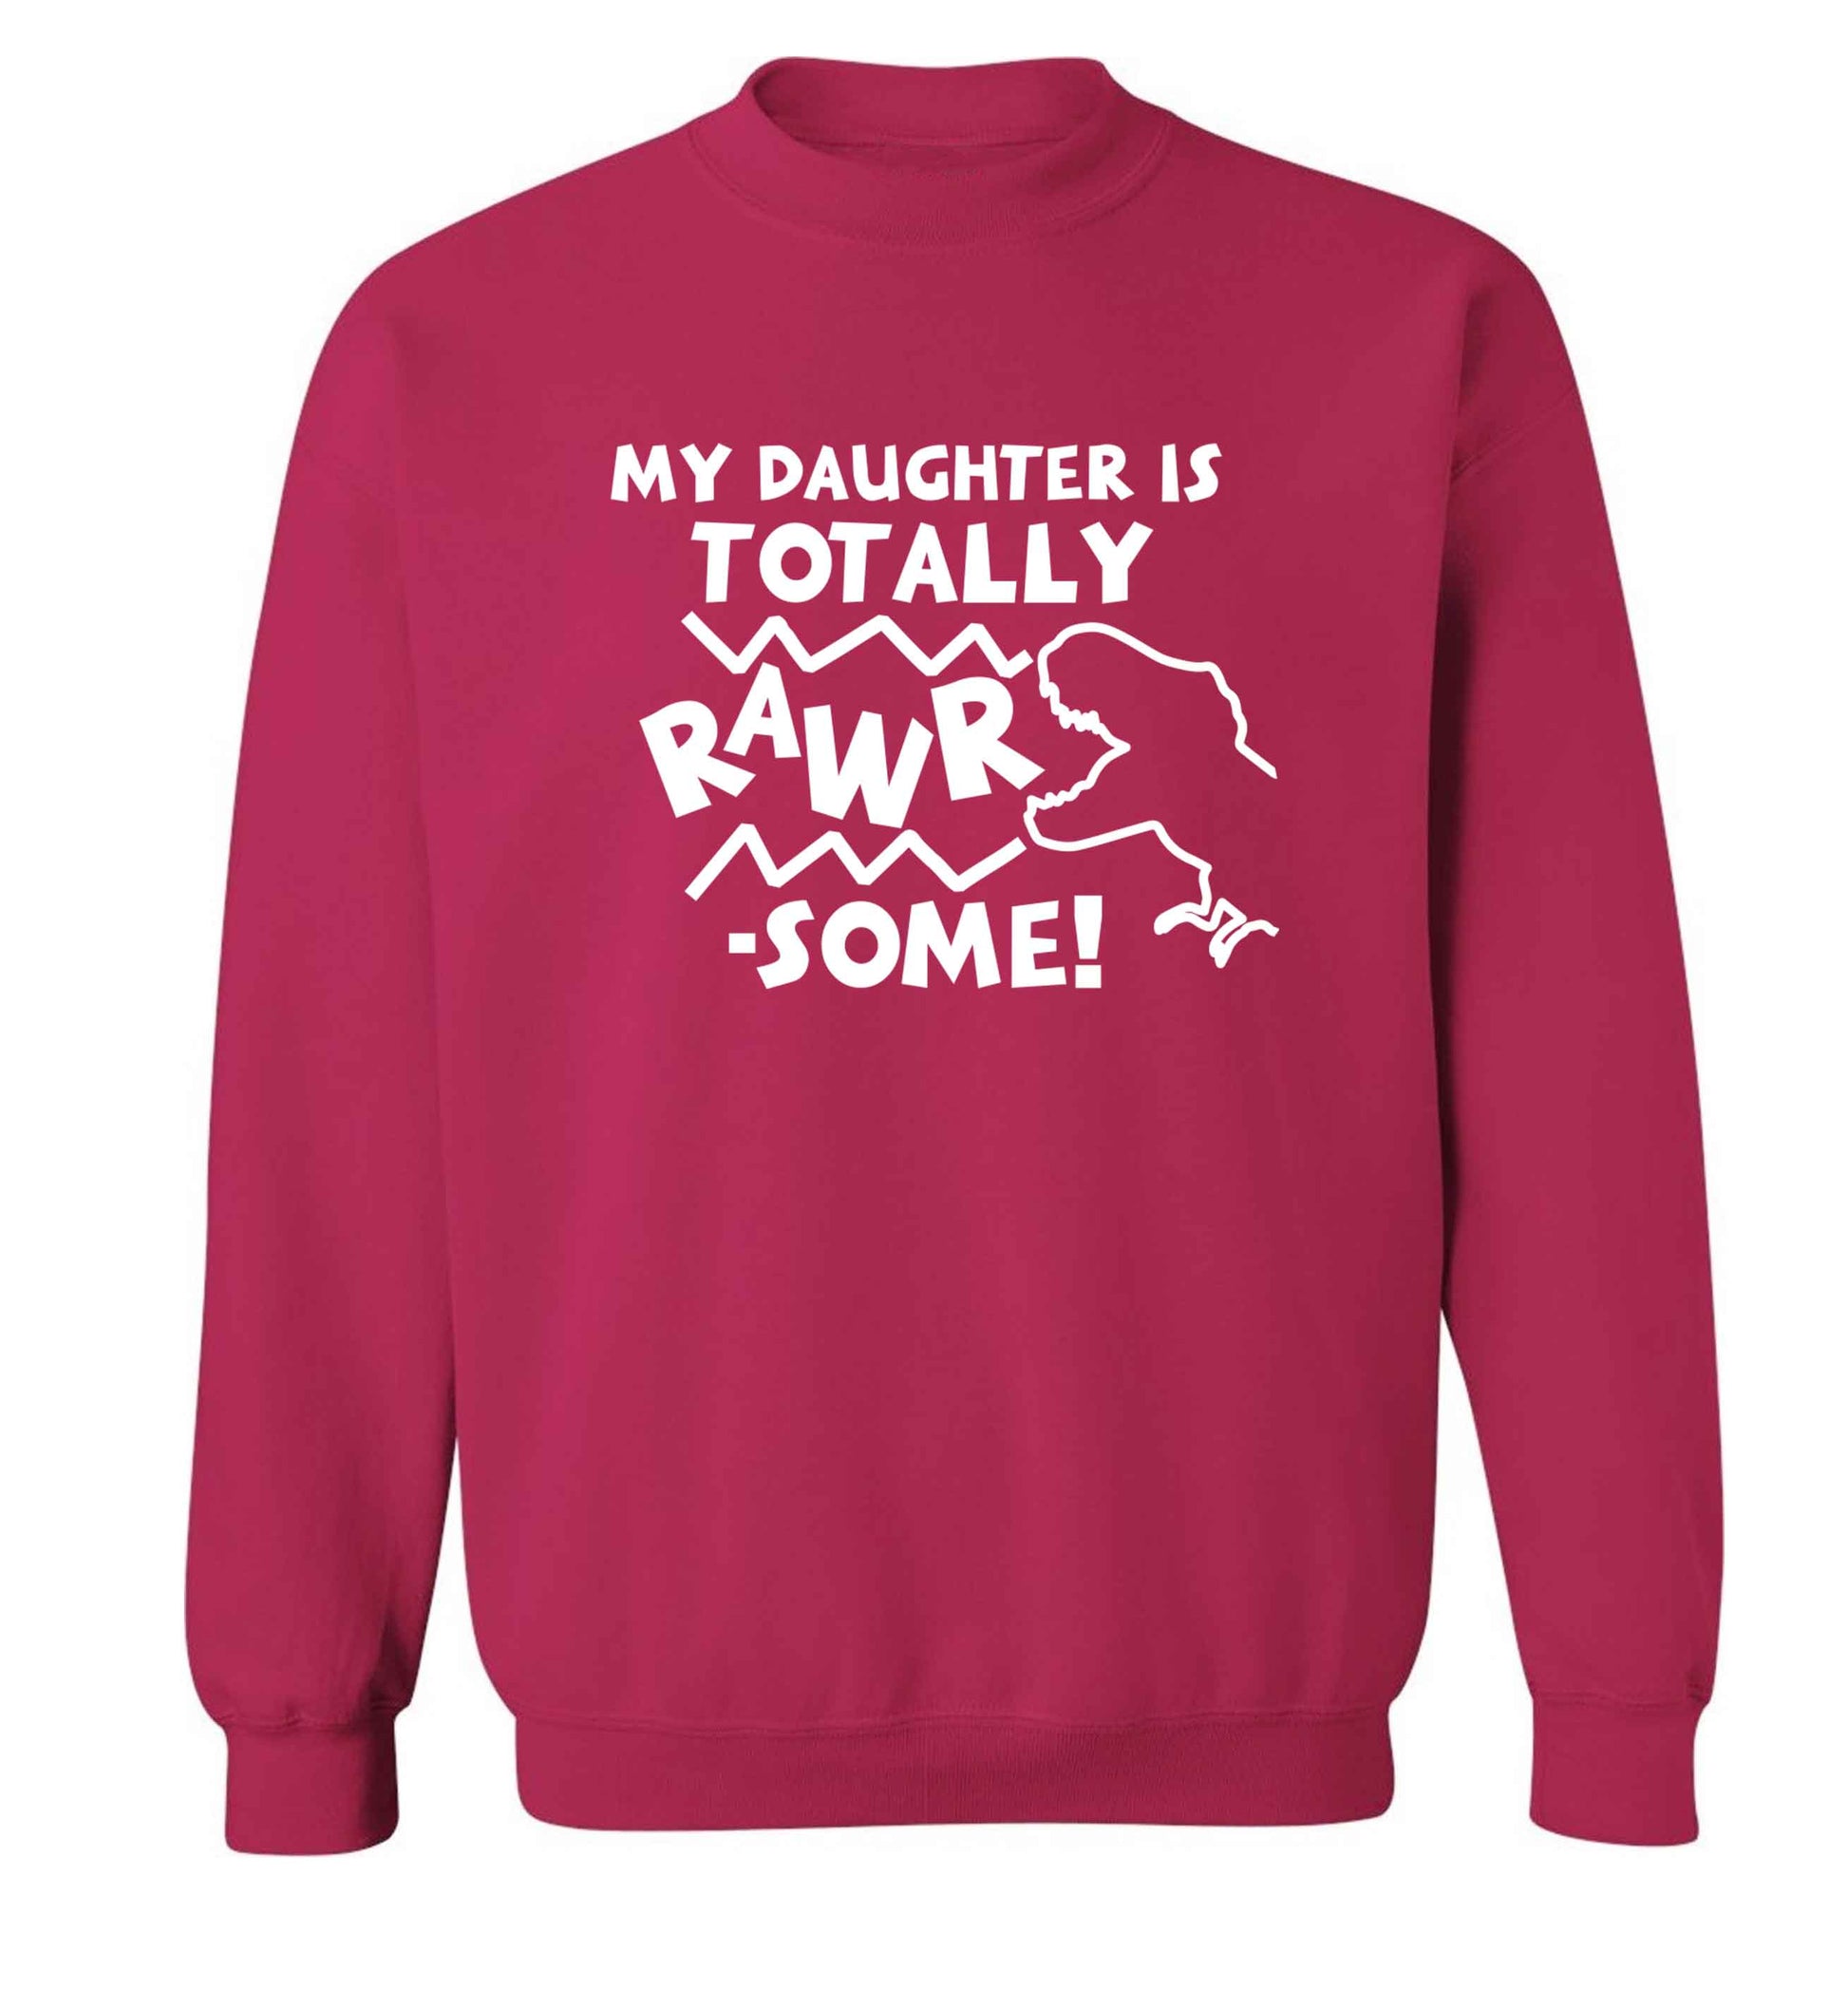 My daughter is totally rawrsome adult's unisex pink sweater 2XL